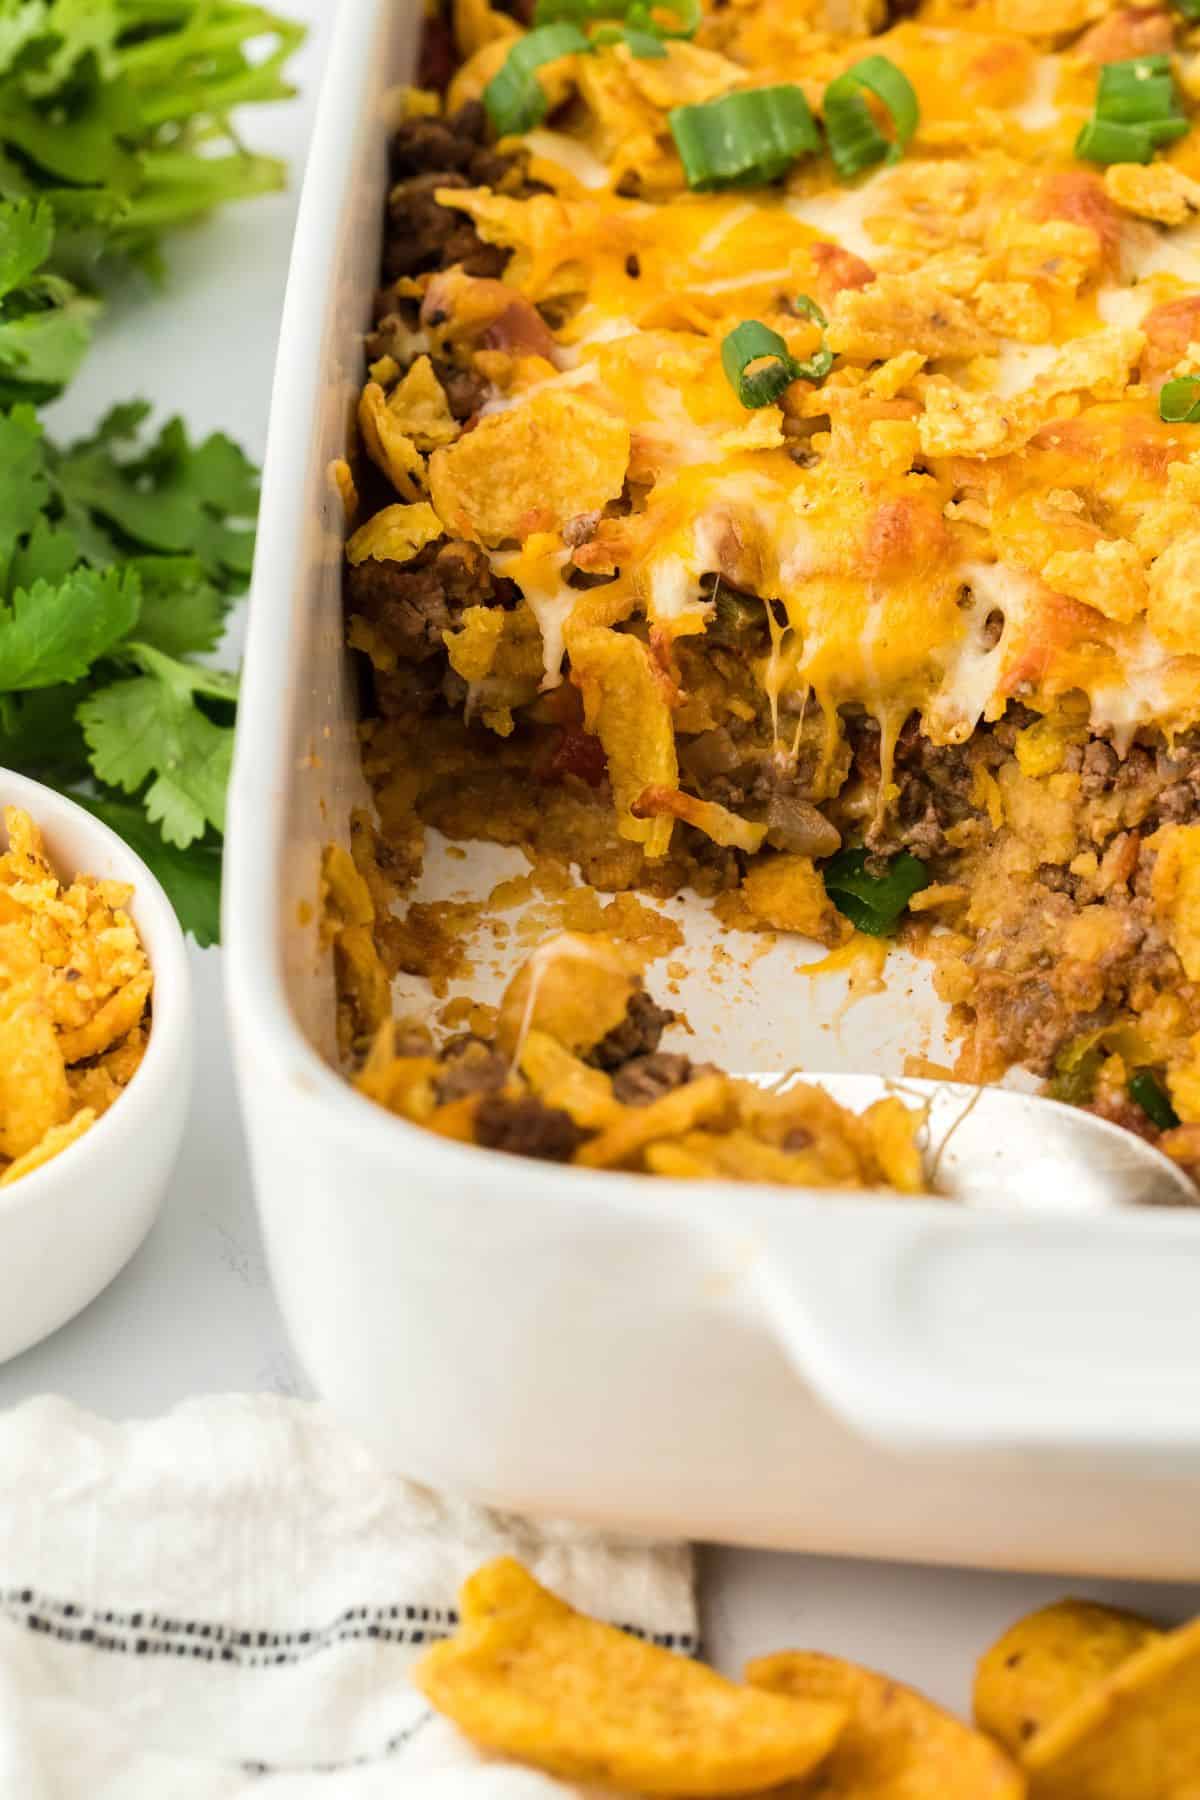 Close-up of a partially eaten Frito pie in a casserole dish, showing layers of ground beef, melted cheese, Fritos corn chips, and chopped green onions. Fresh cilantro and a bowl of Fritos are in the background